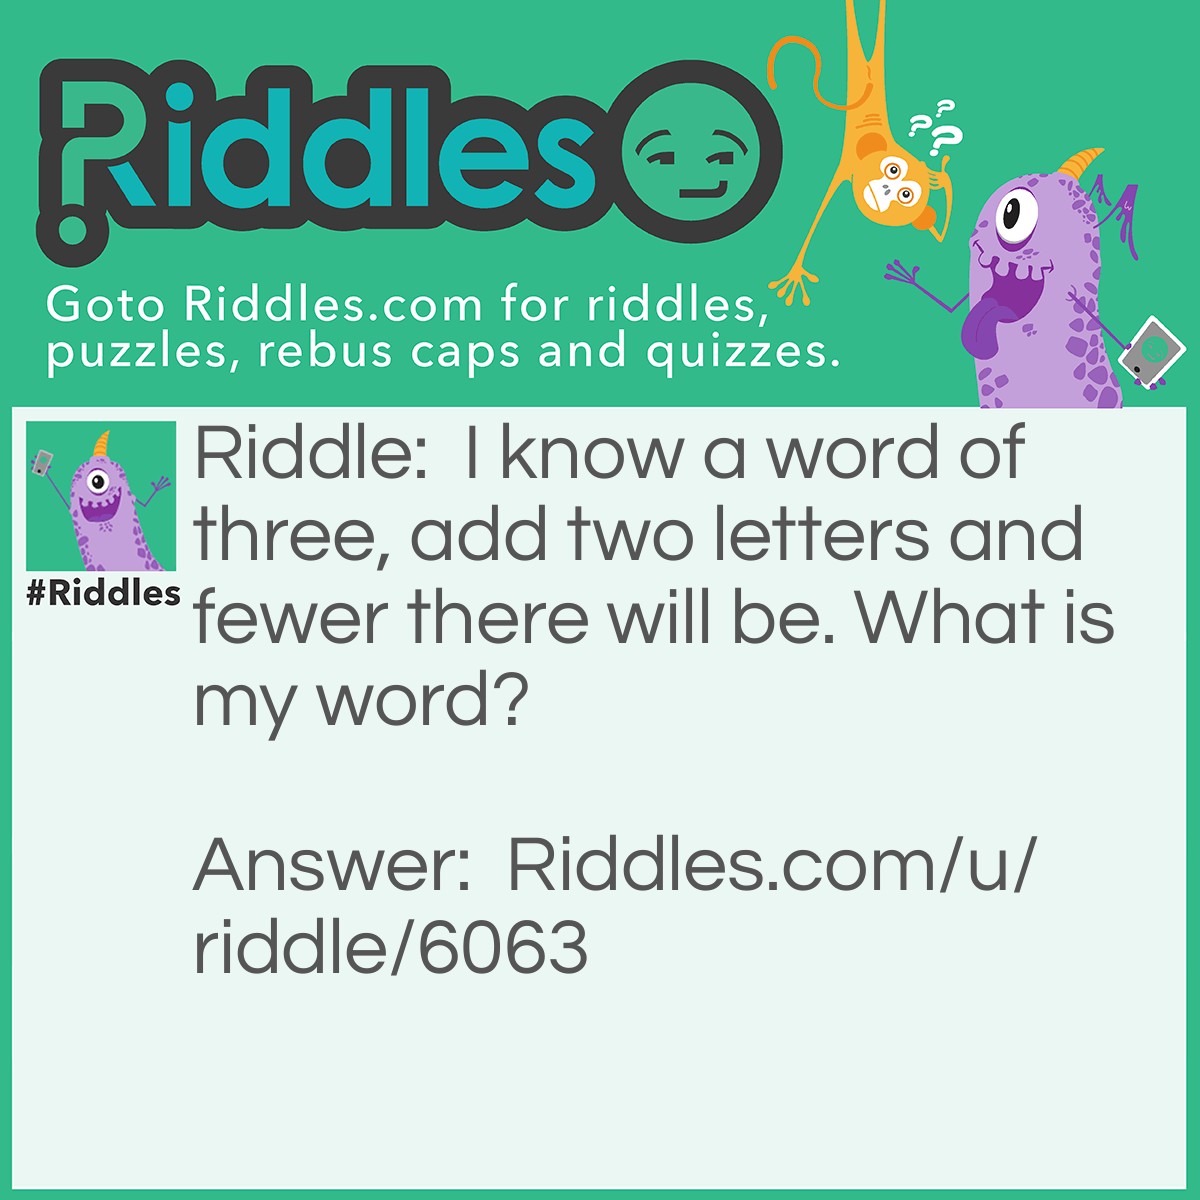 Riddle: I know a word of three, add two letters and fewer there will be. What is my word? Answer: Few.